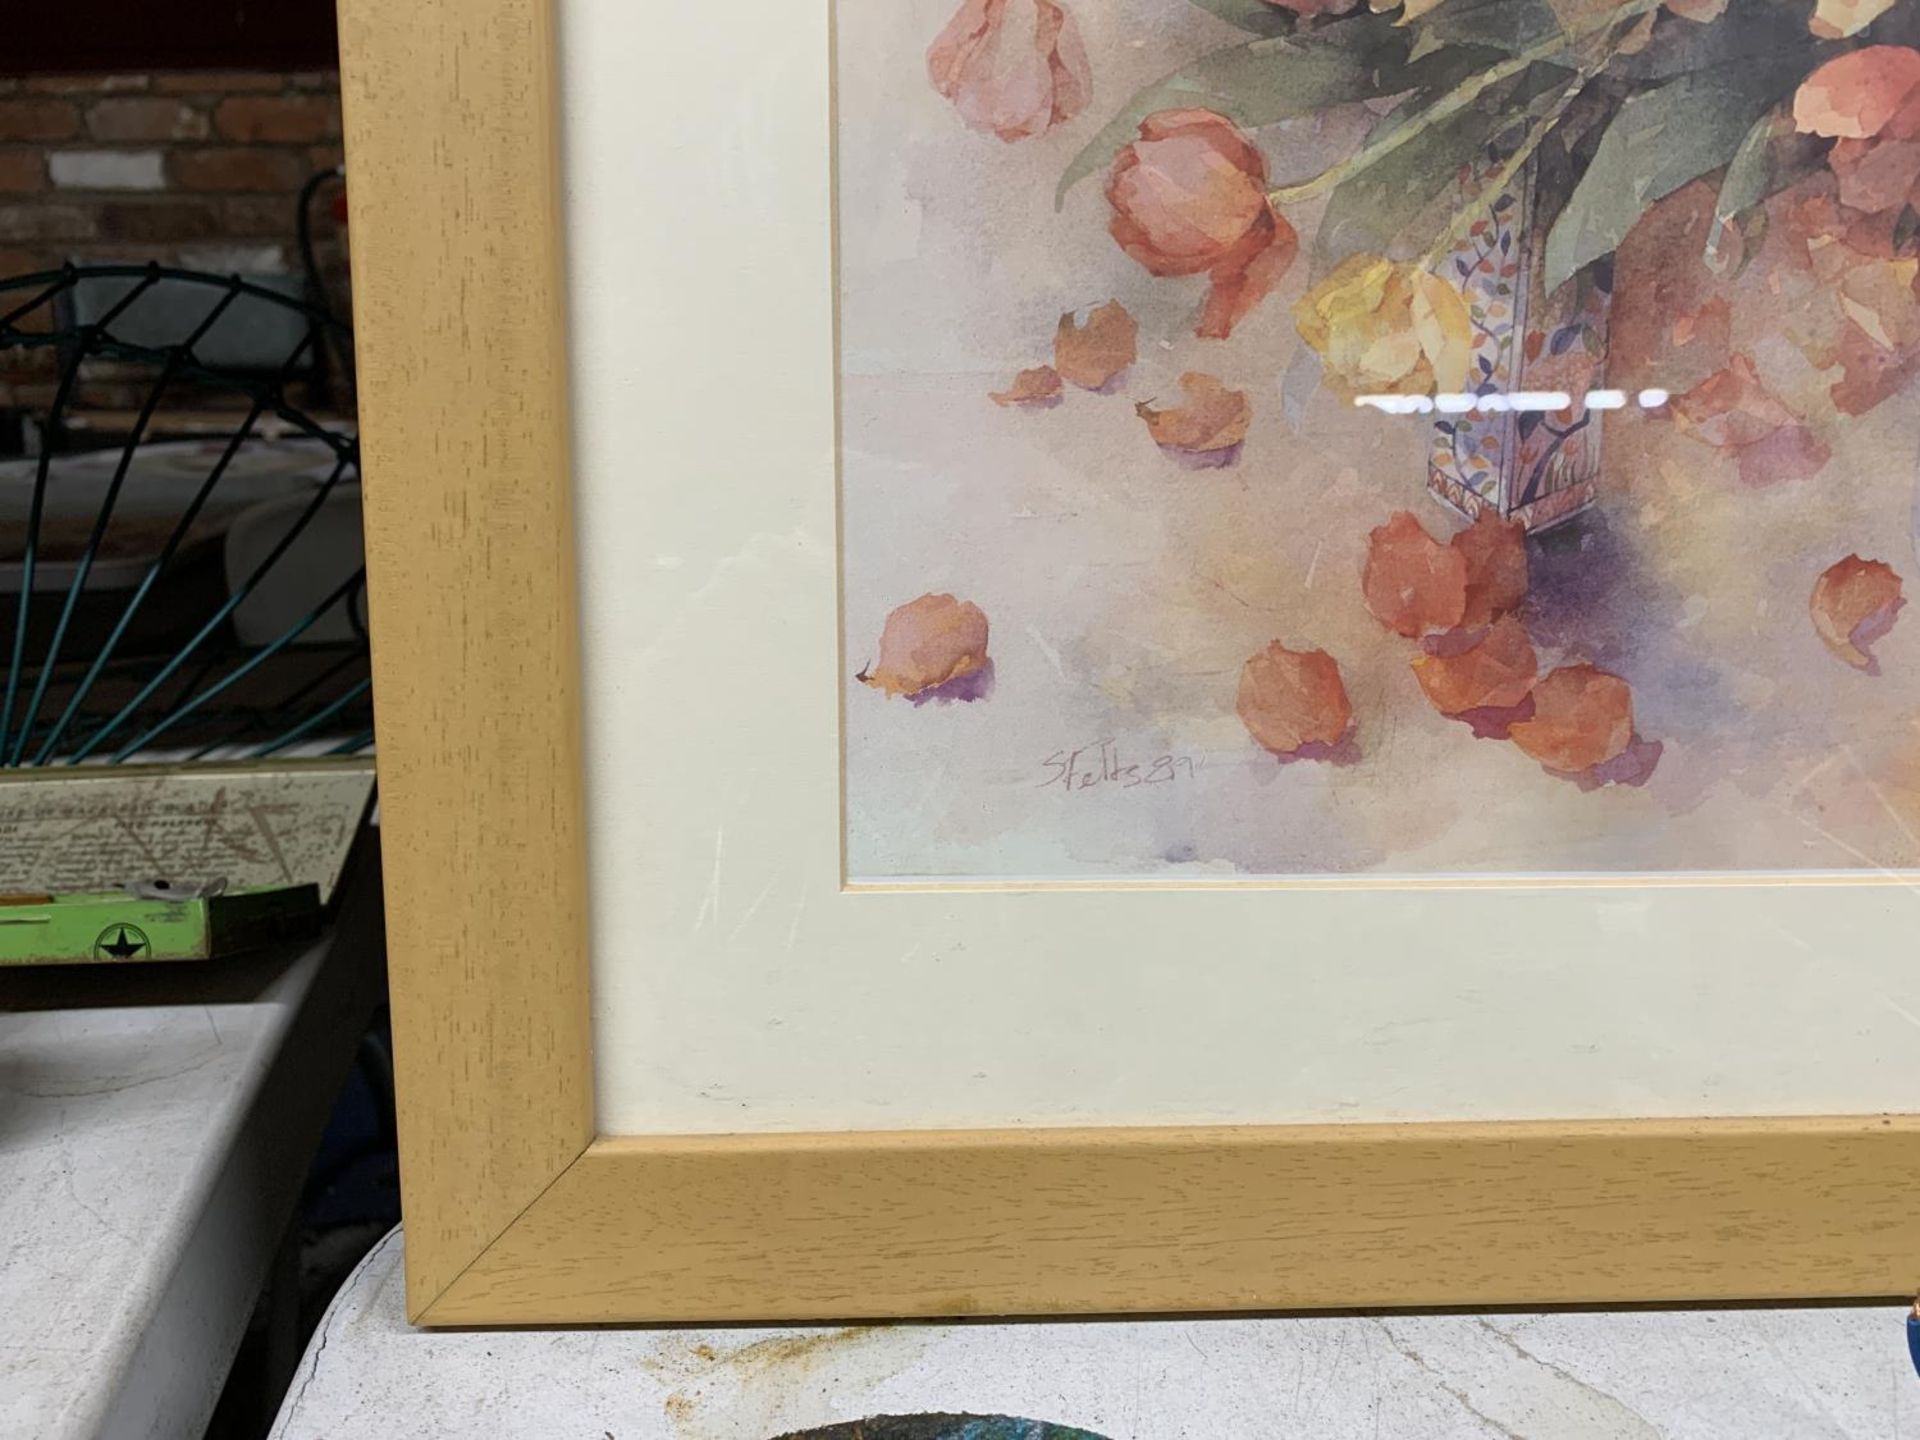 A FRAMED STILL LIFE PRINT OF A VASE OF FLOWERS - Image 2 of 2